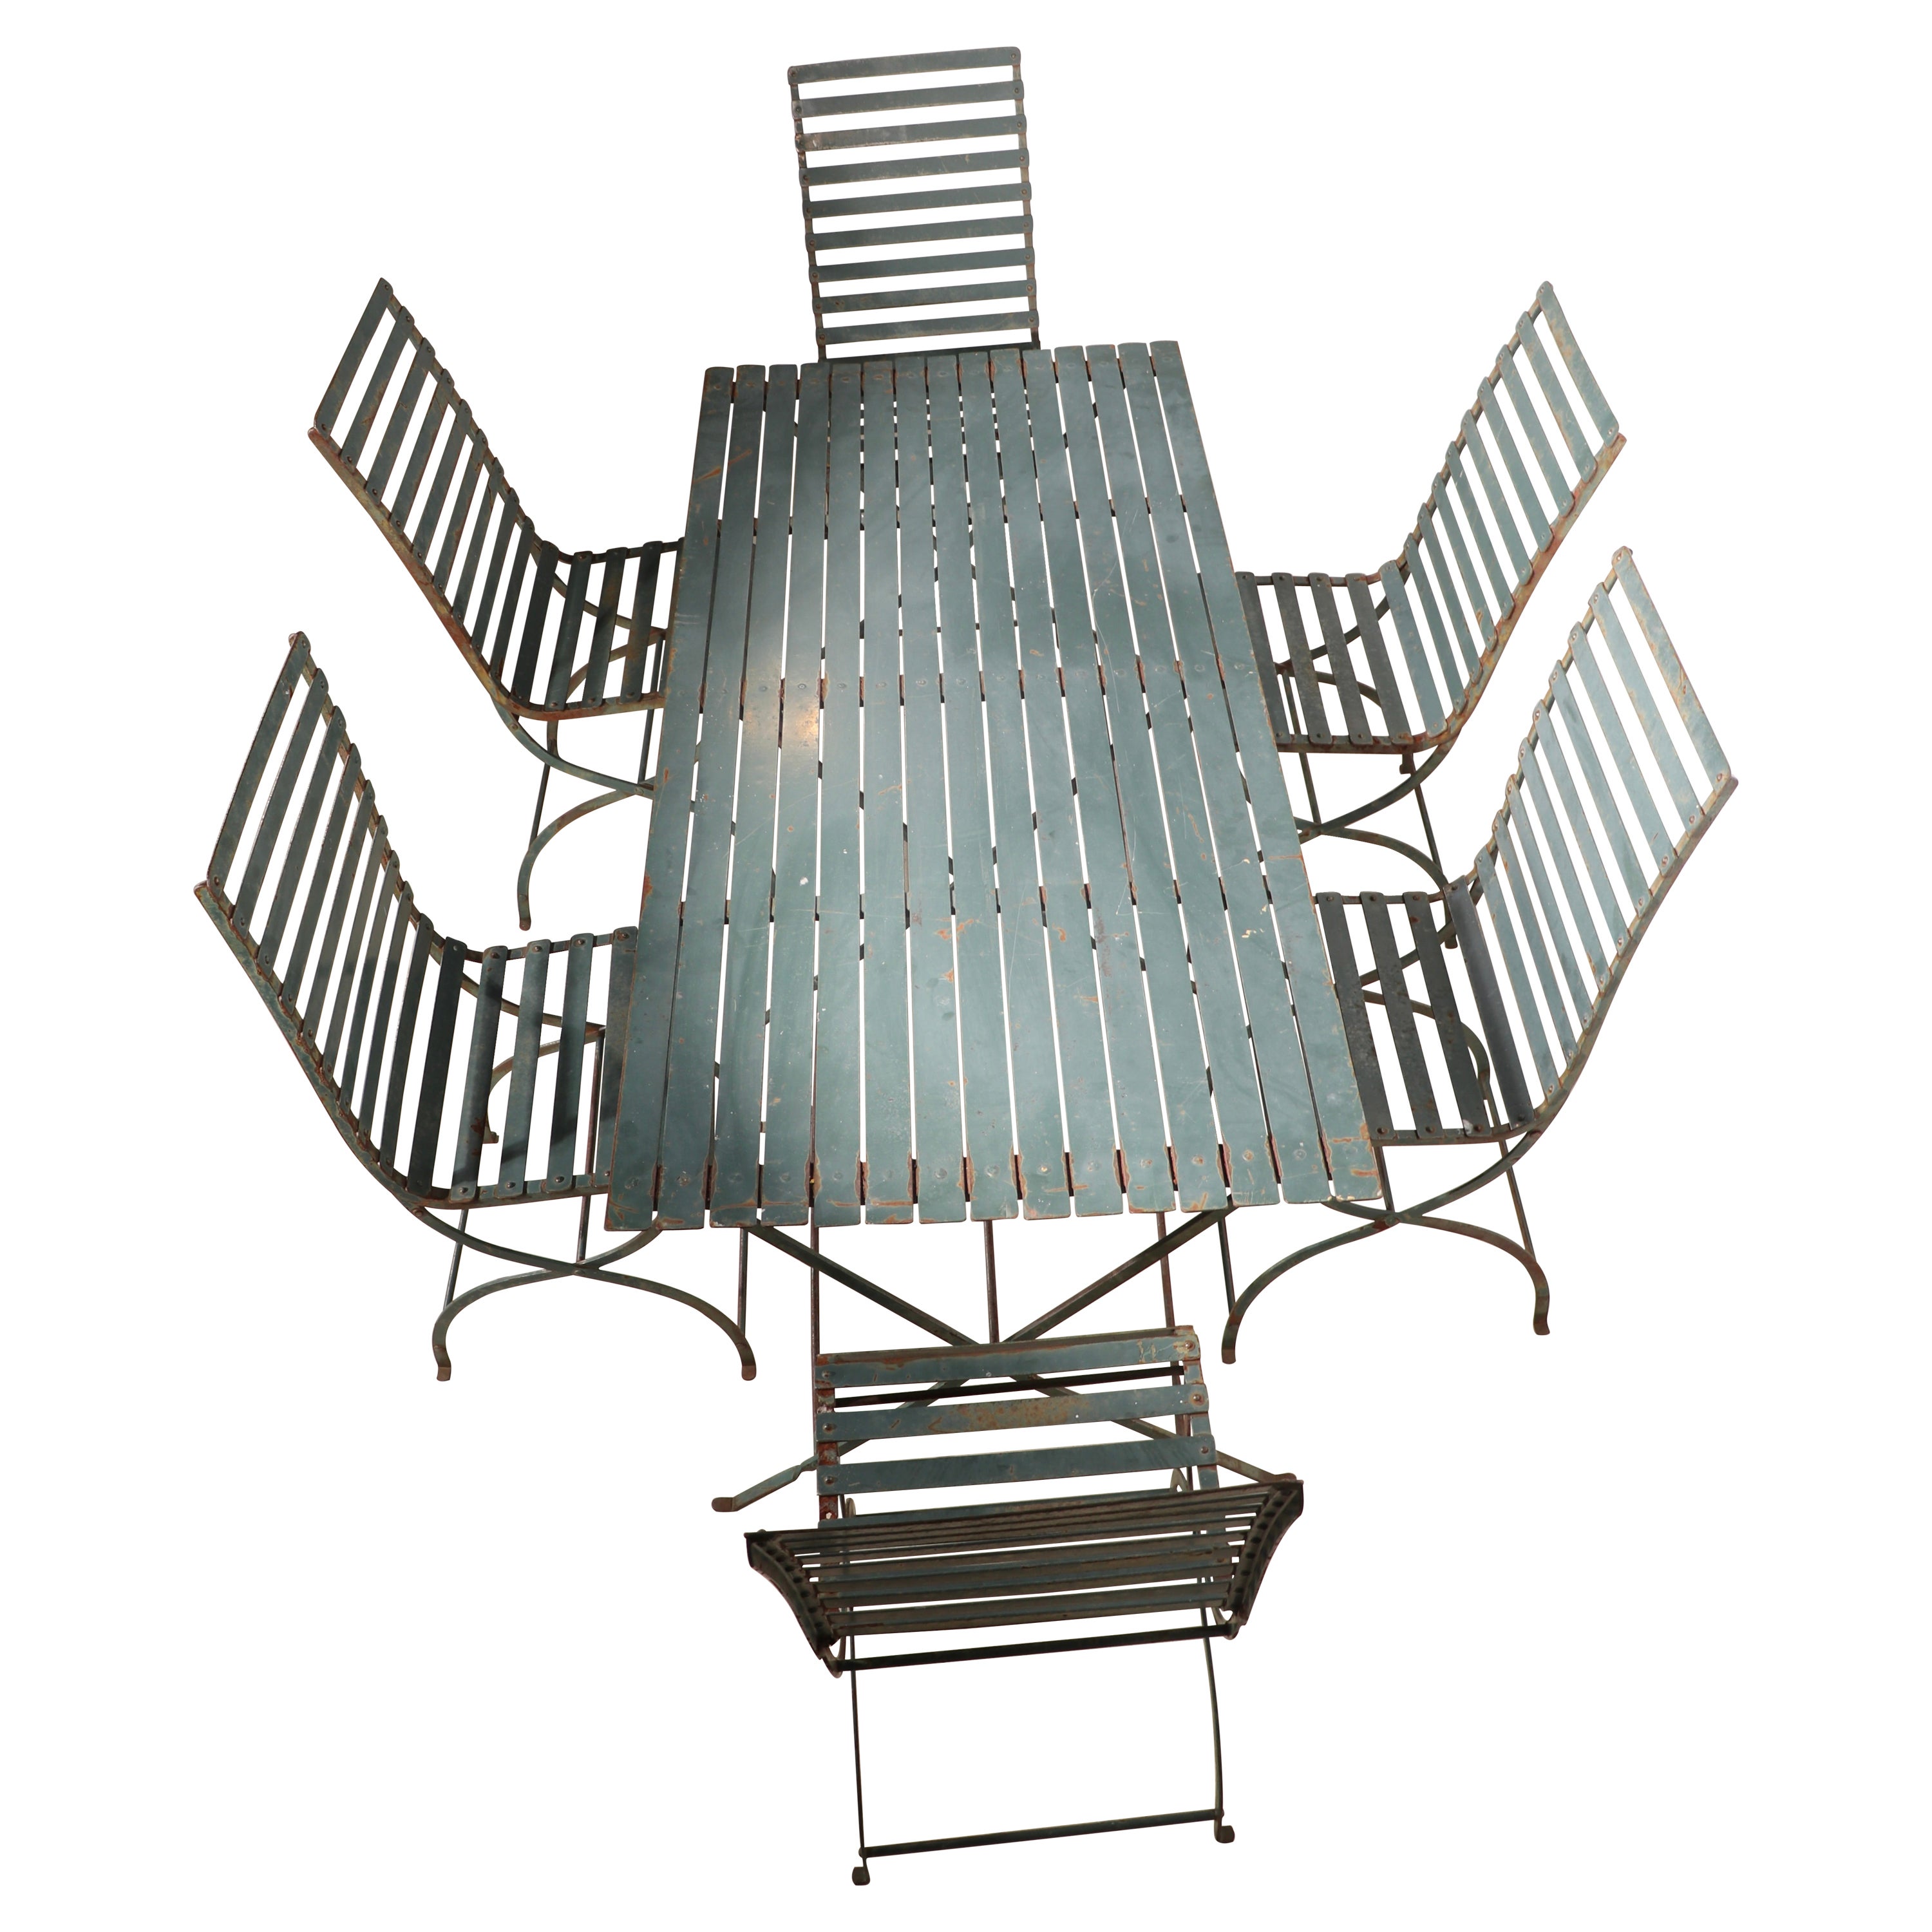 7 Pc French Wrought Iron Garden Patio Dining Set Table and 6 Chairs 1920/1930